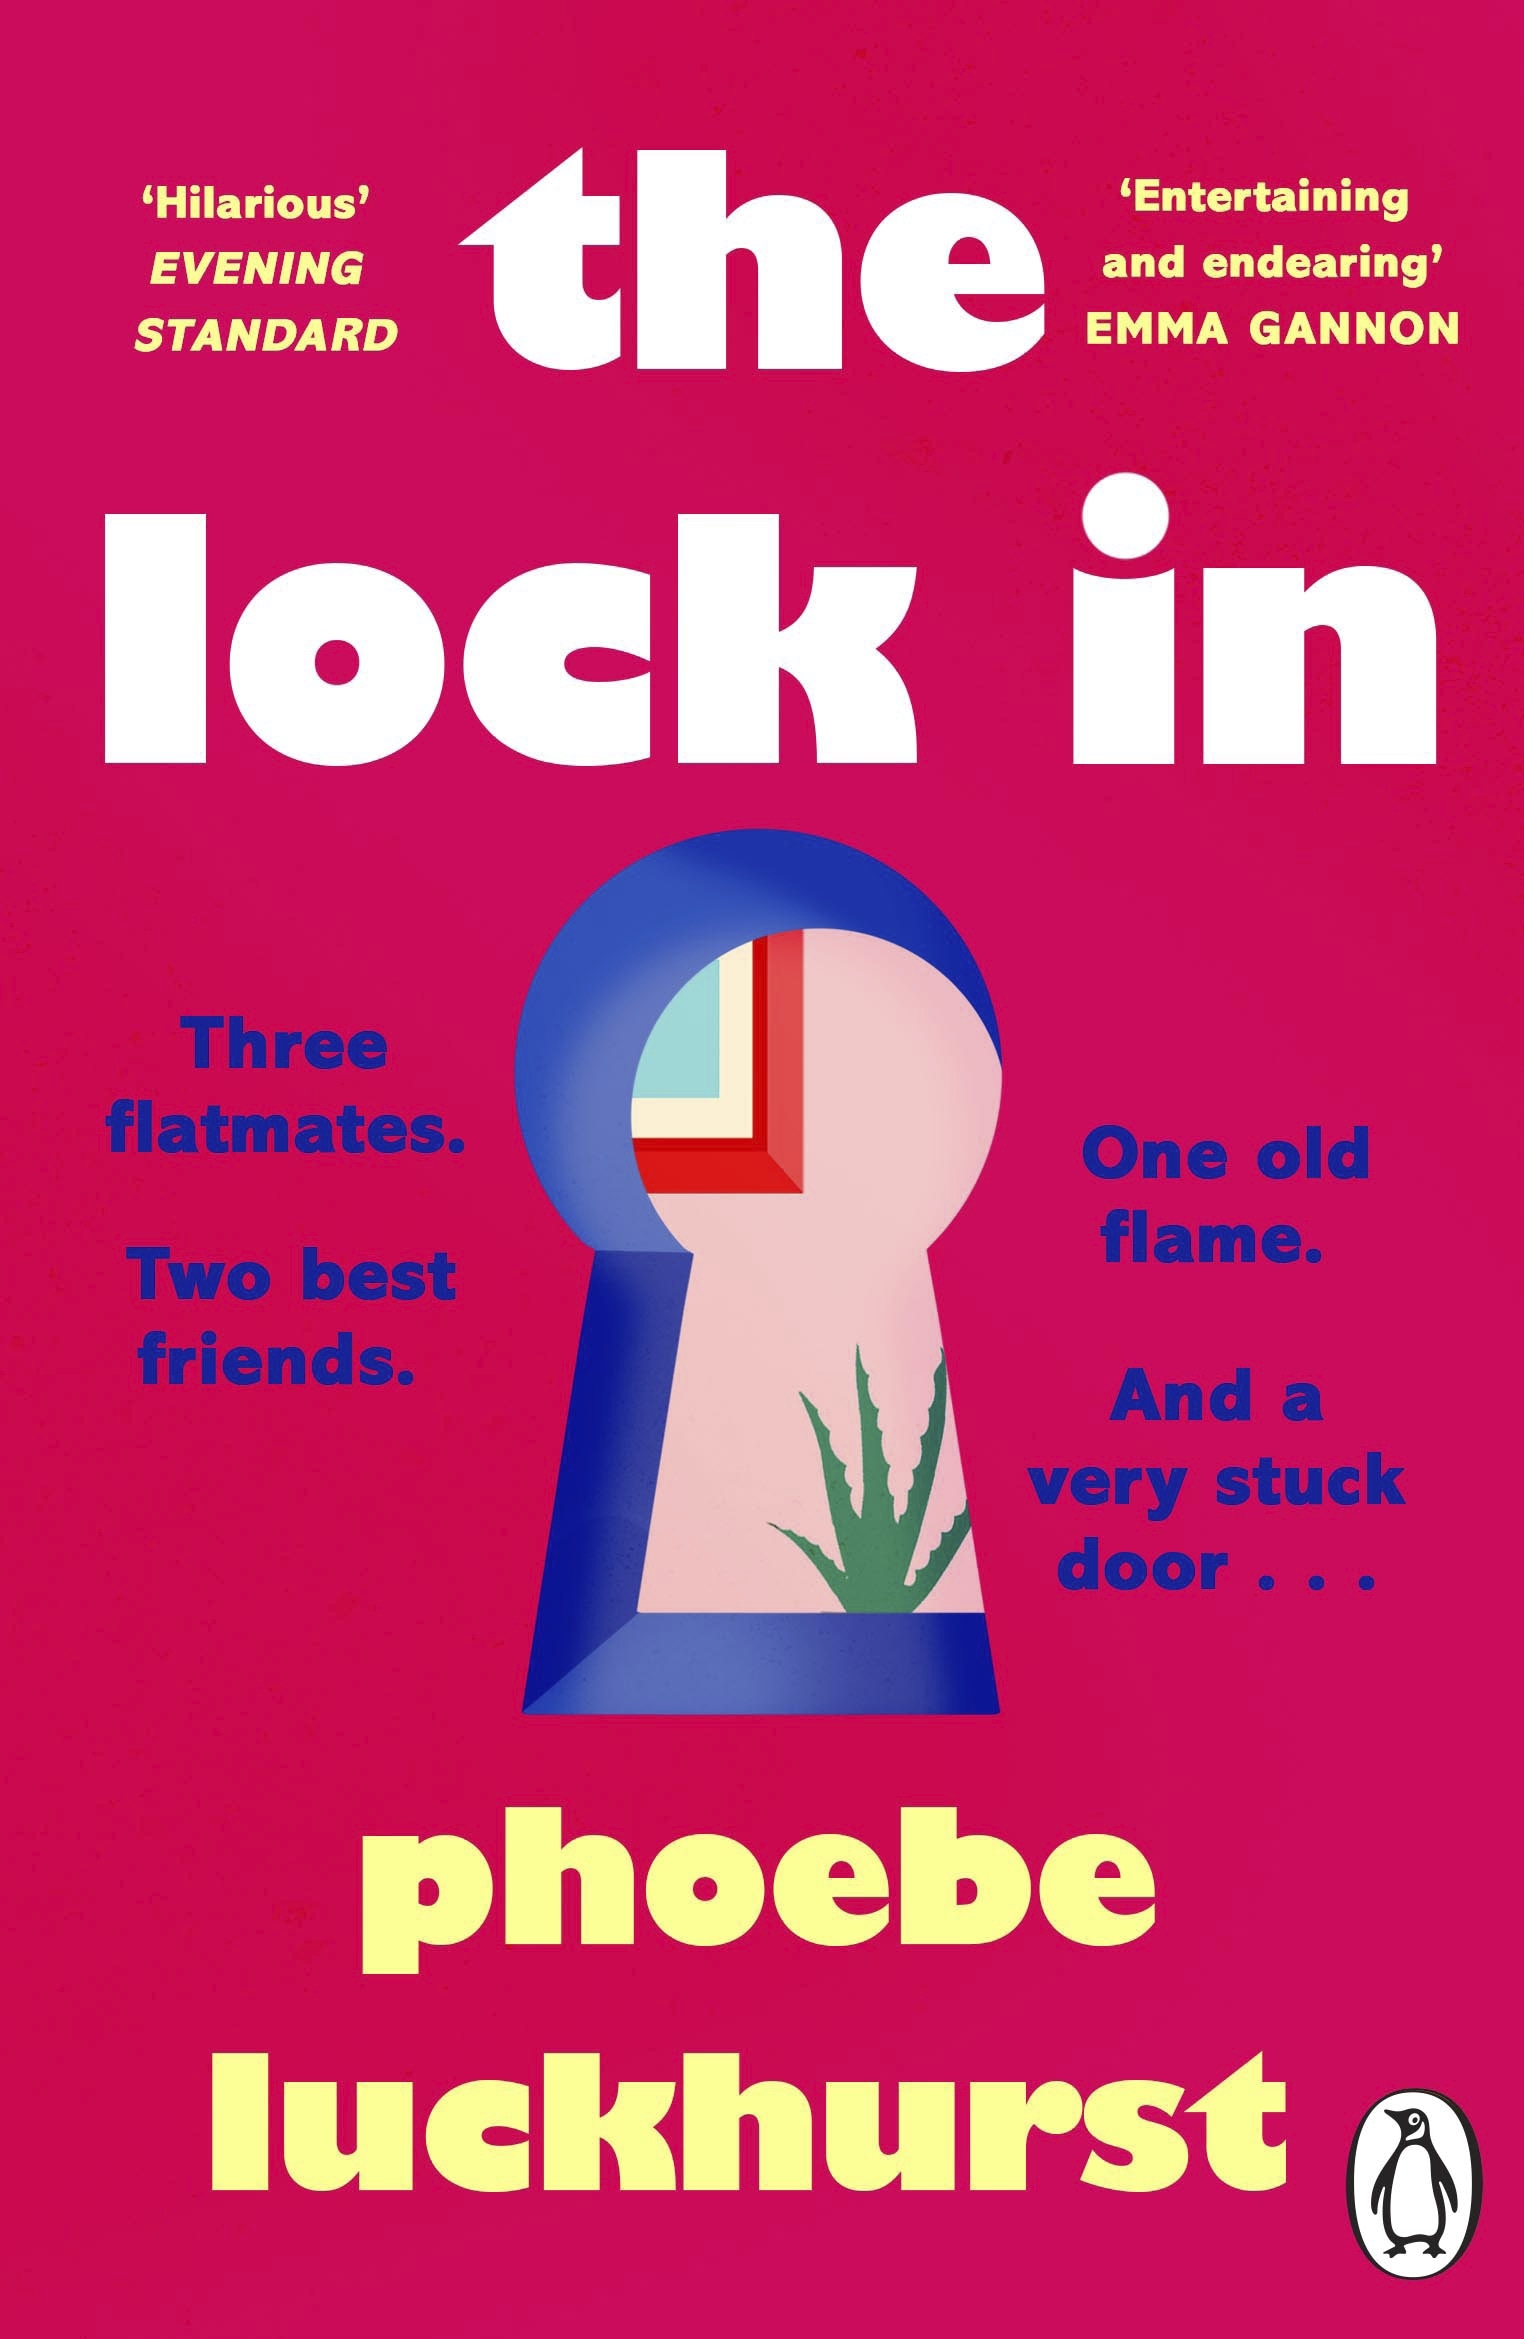 Book “The Lock In” by Phoebe Luckhurst — March 31, 2022